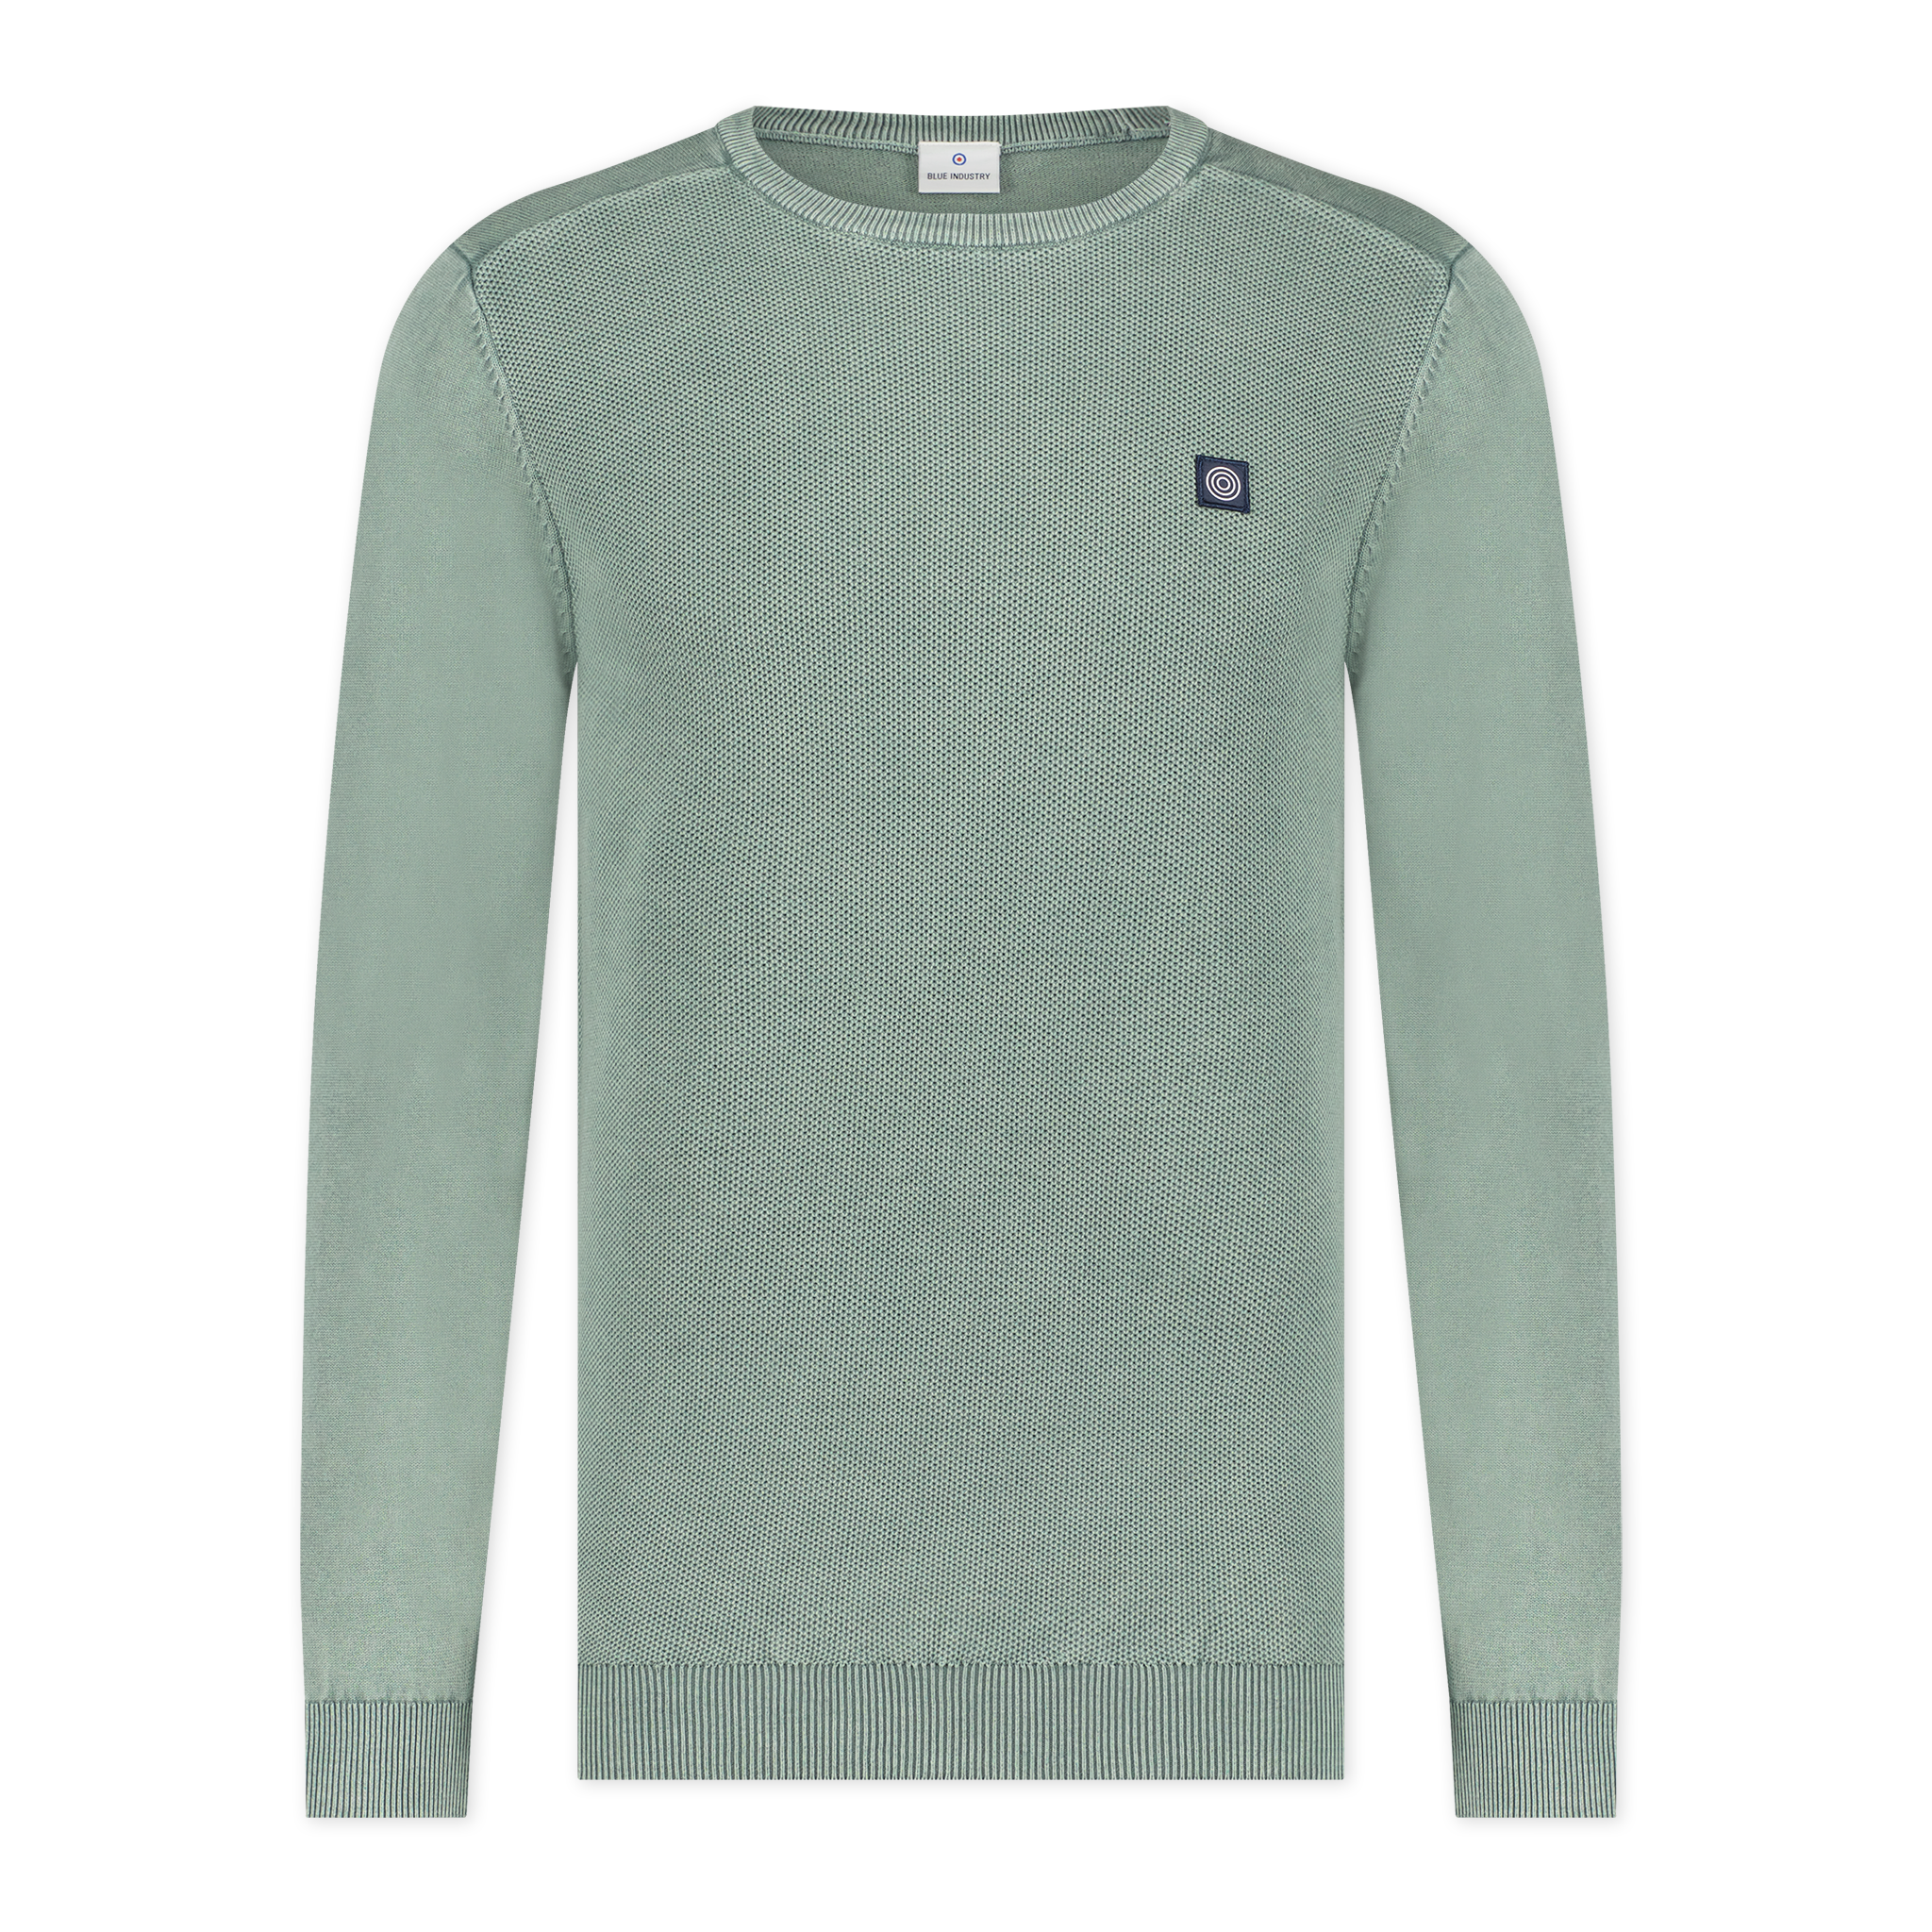 Blue Industry Kbiw23-m14 pullover green